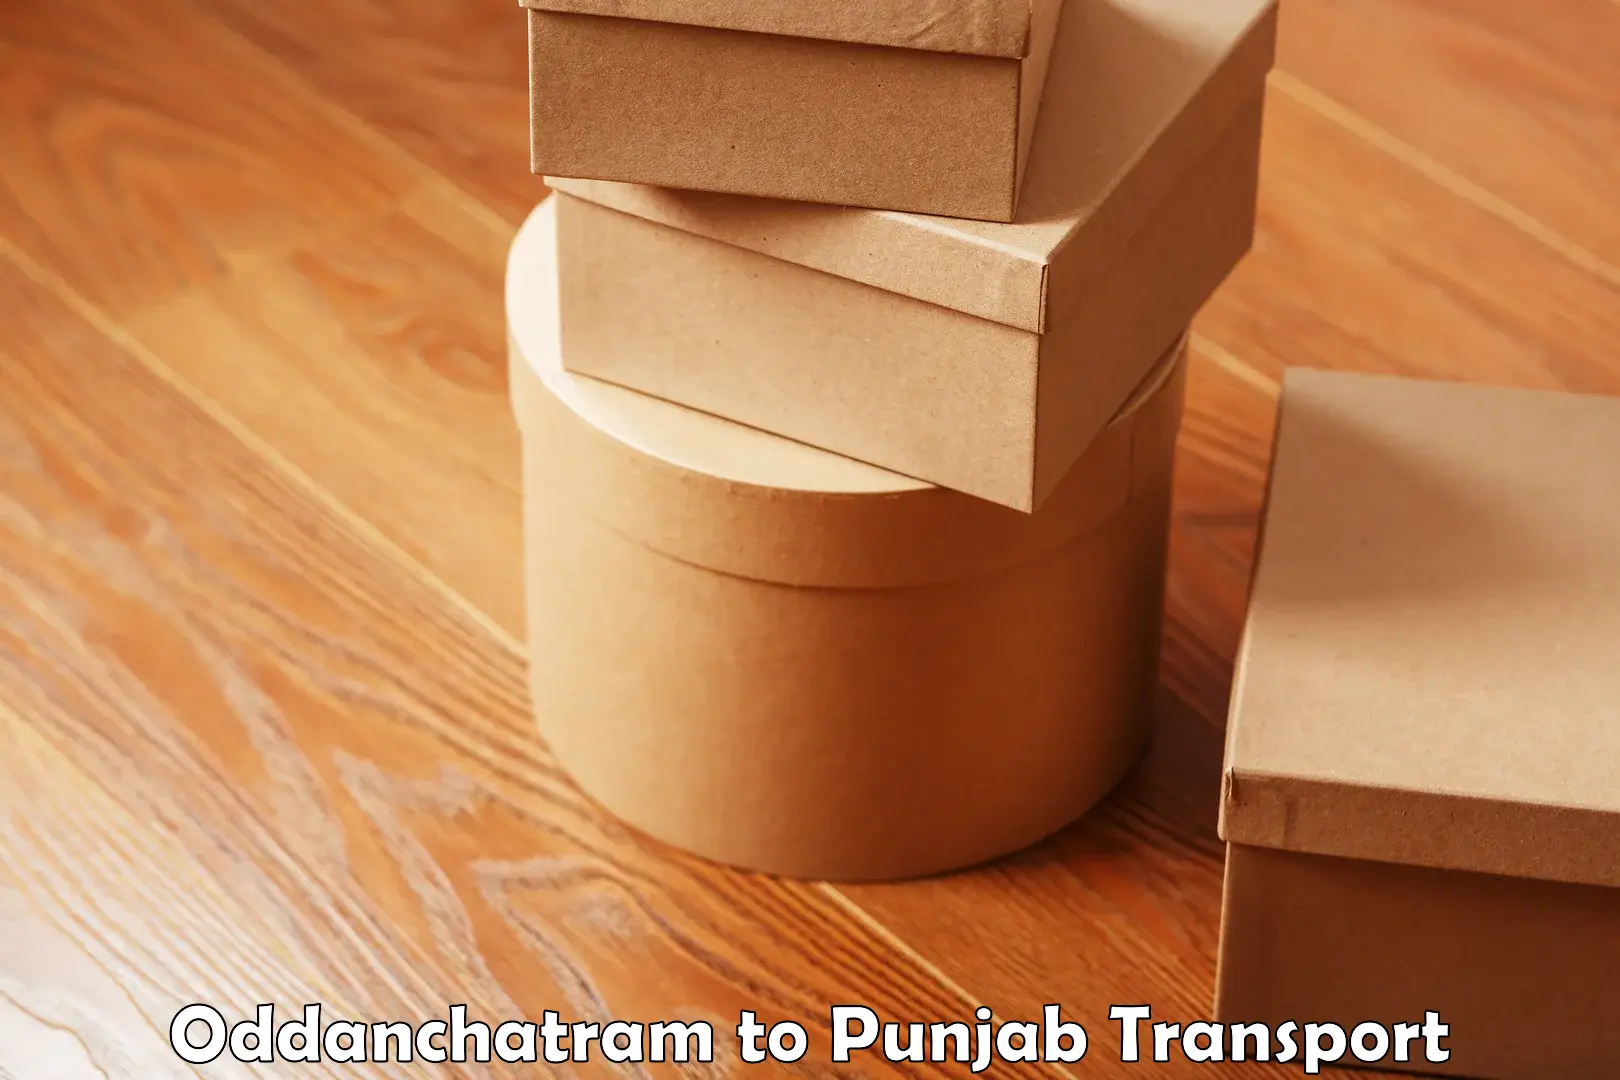 Shipping services in Oddanchatram to Punjab